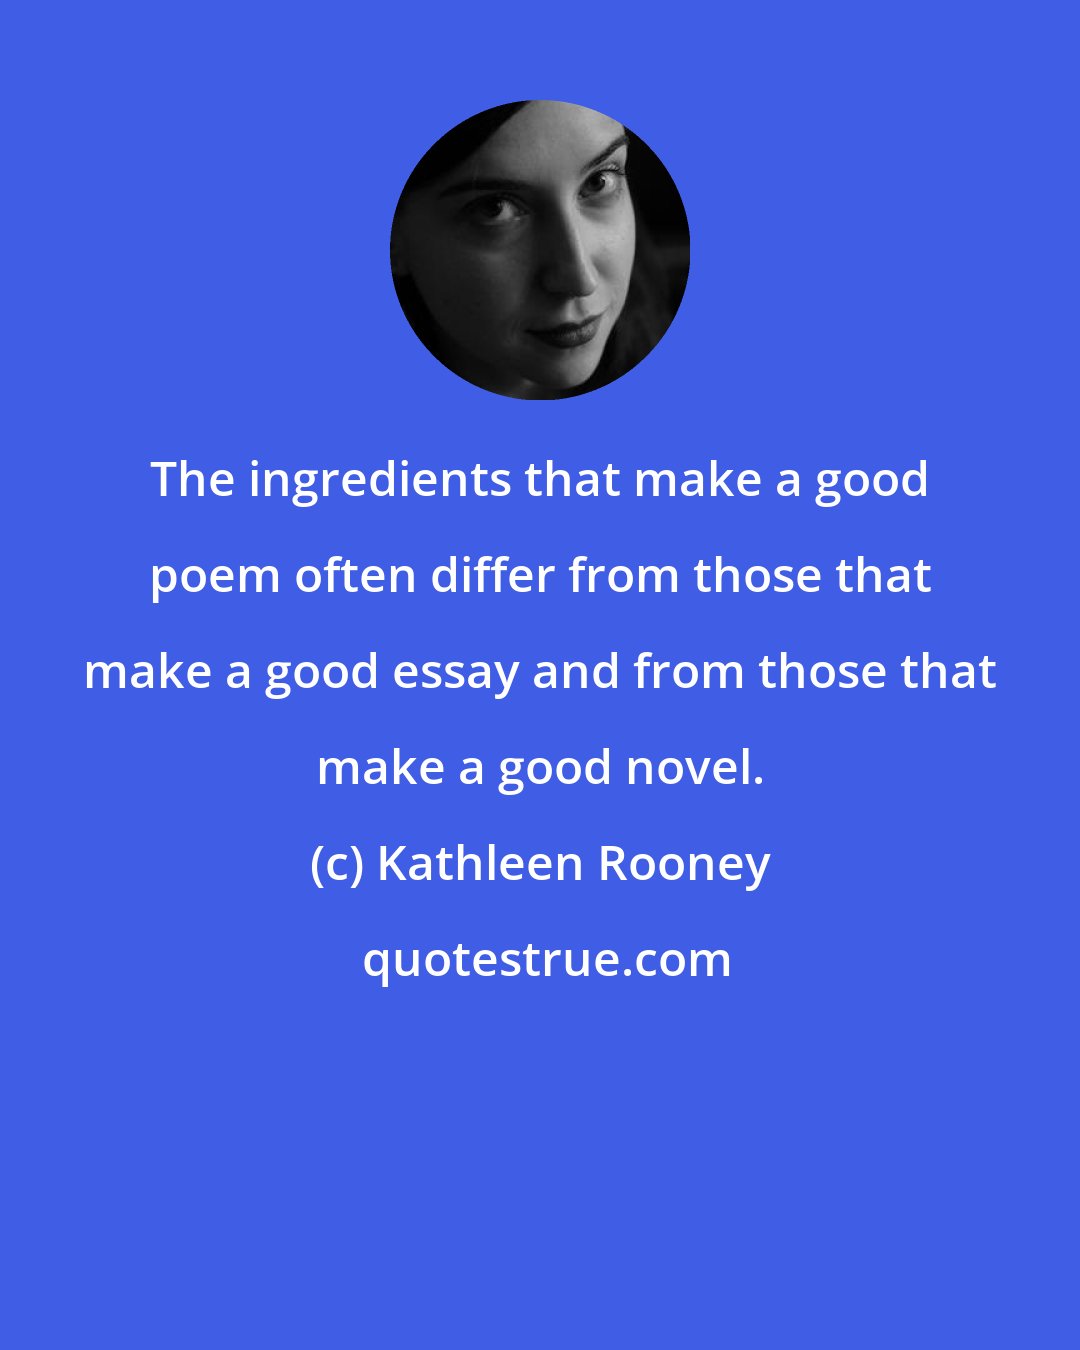 Kathleen Rooney: The ingredients that make a good poem often differ from those that make a good essay and from those that make a good novel.